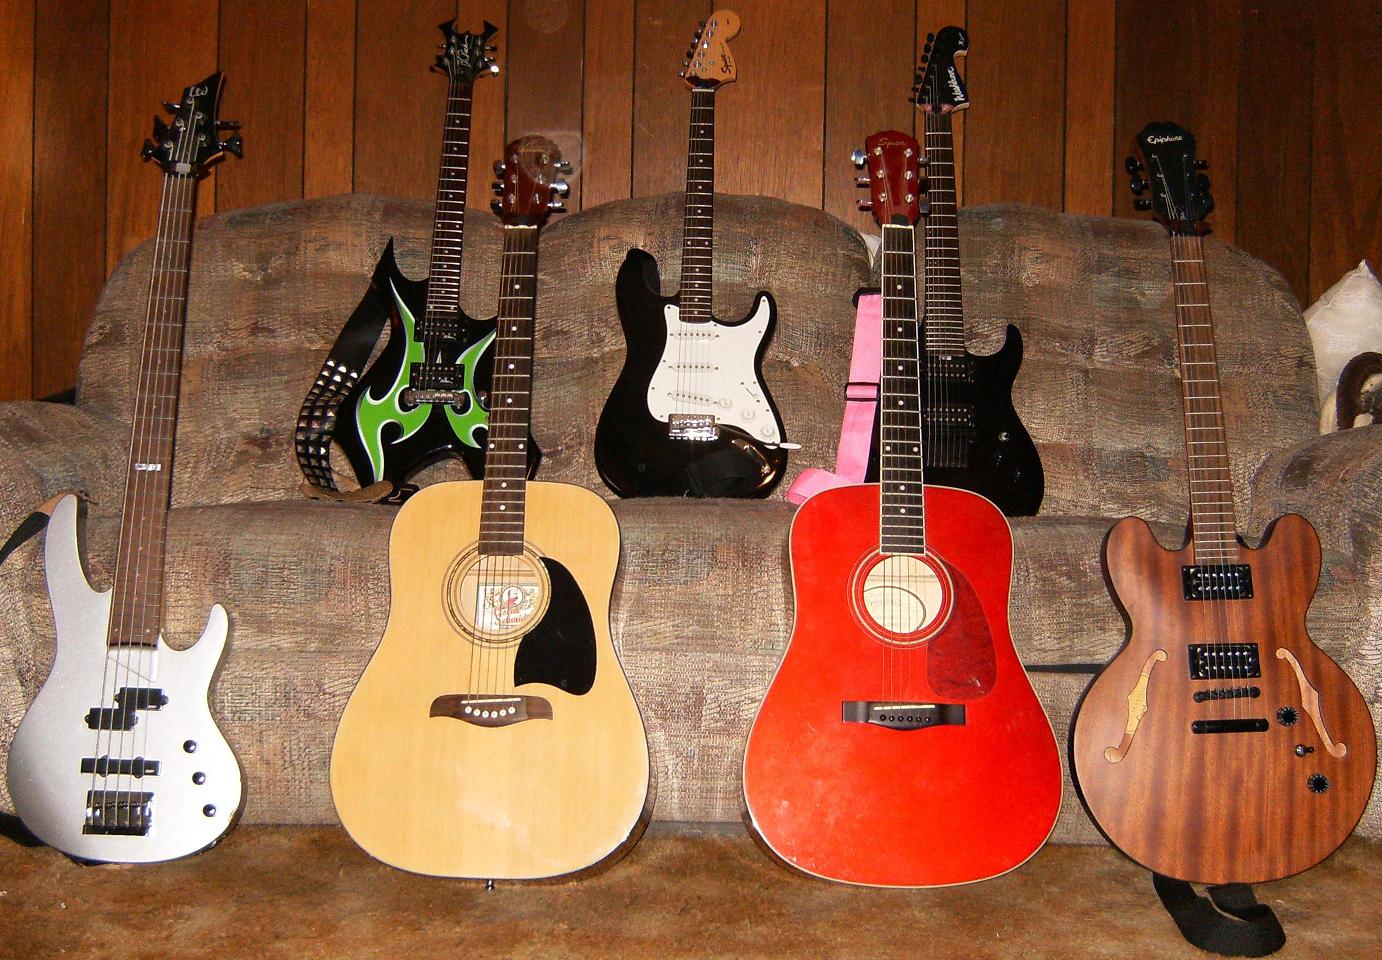 My three solid body electric guitars, My one semi-hollow body guitar, my two acoustic guitars and my bass. Anyone like?